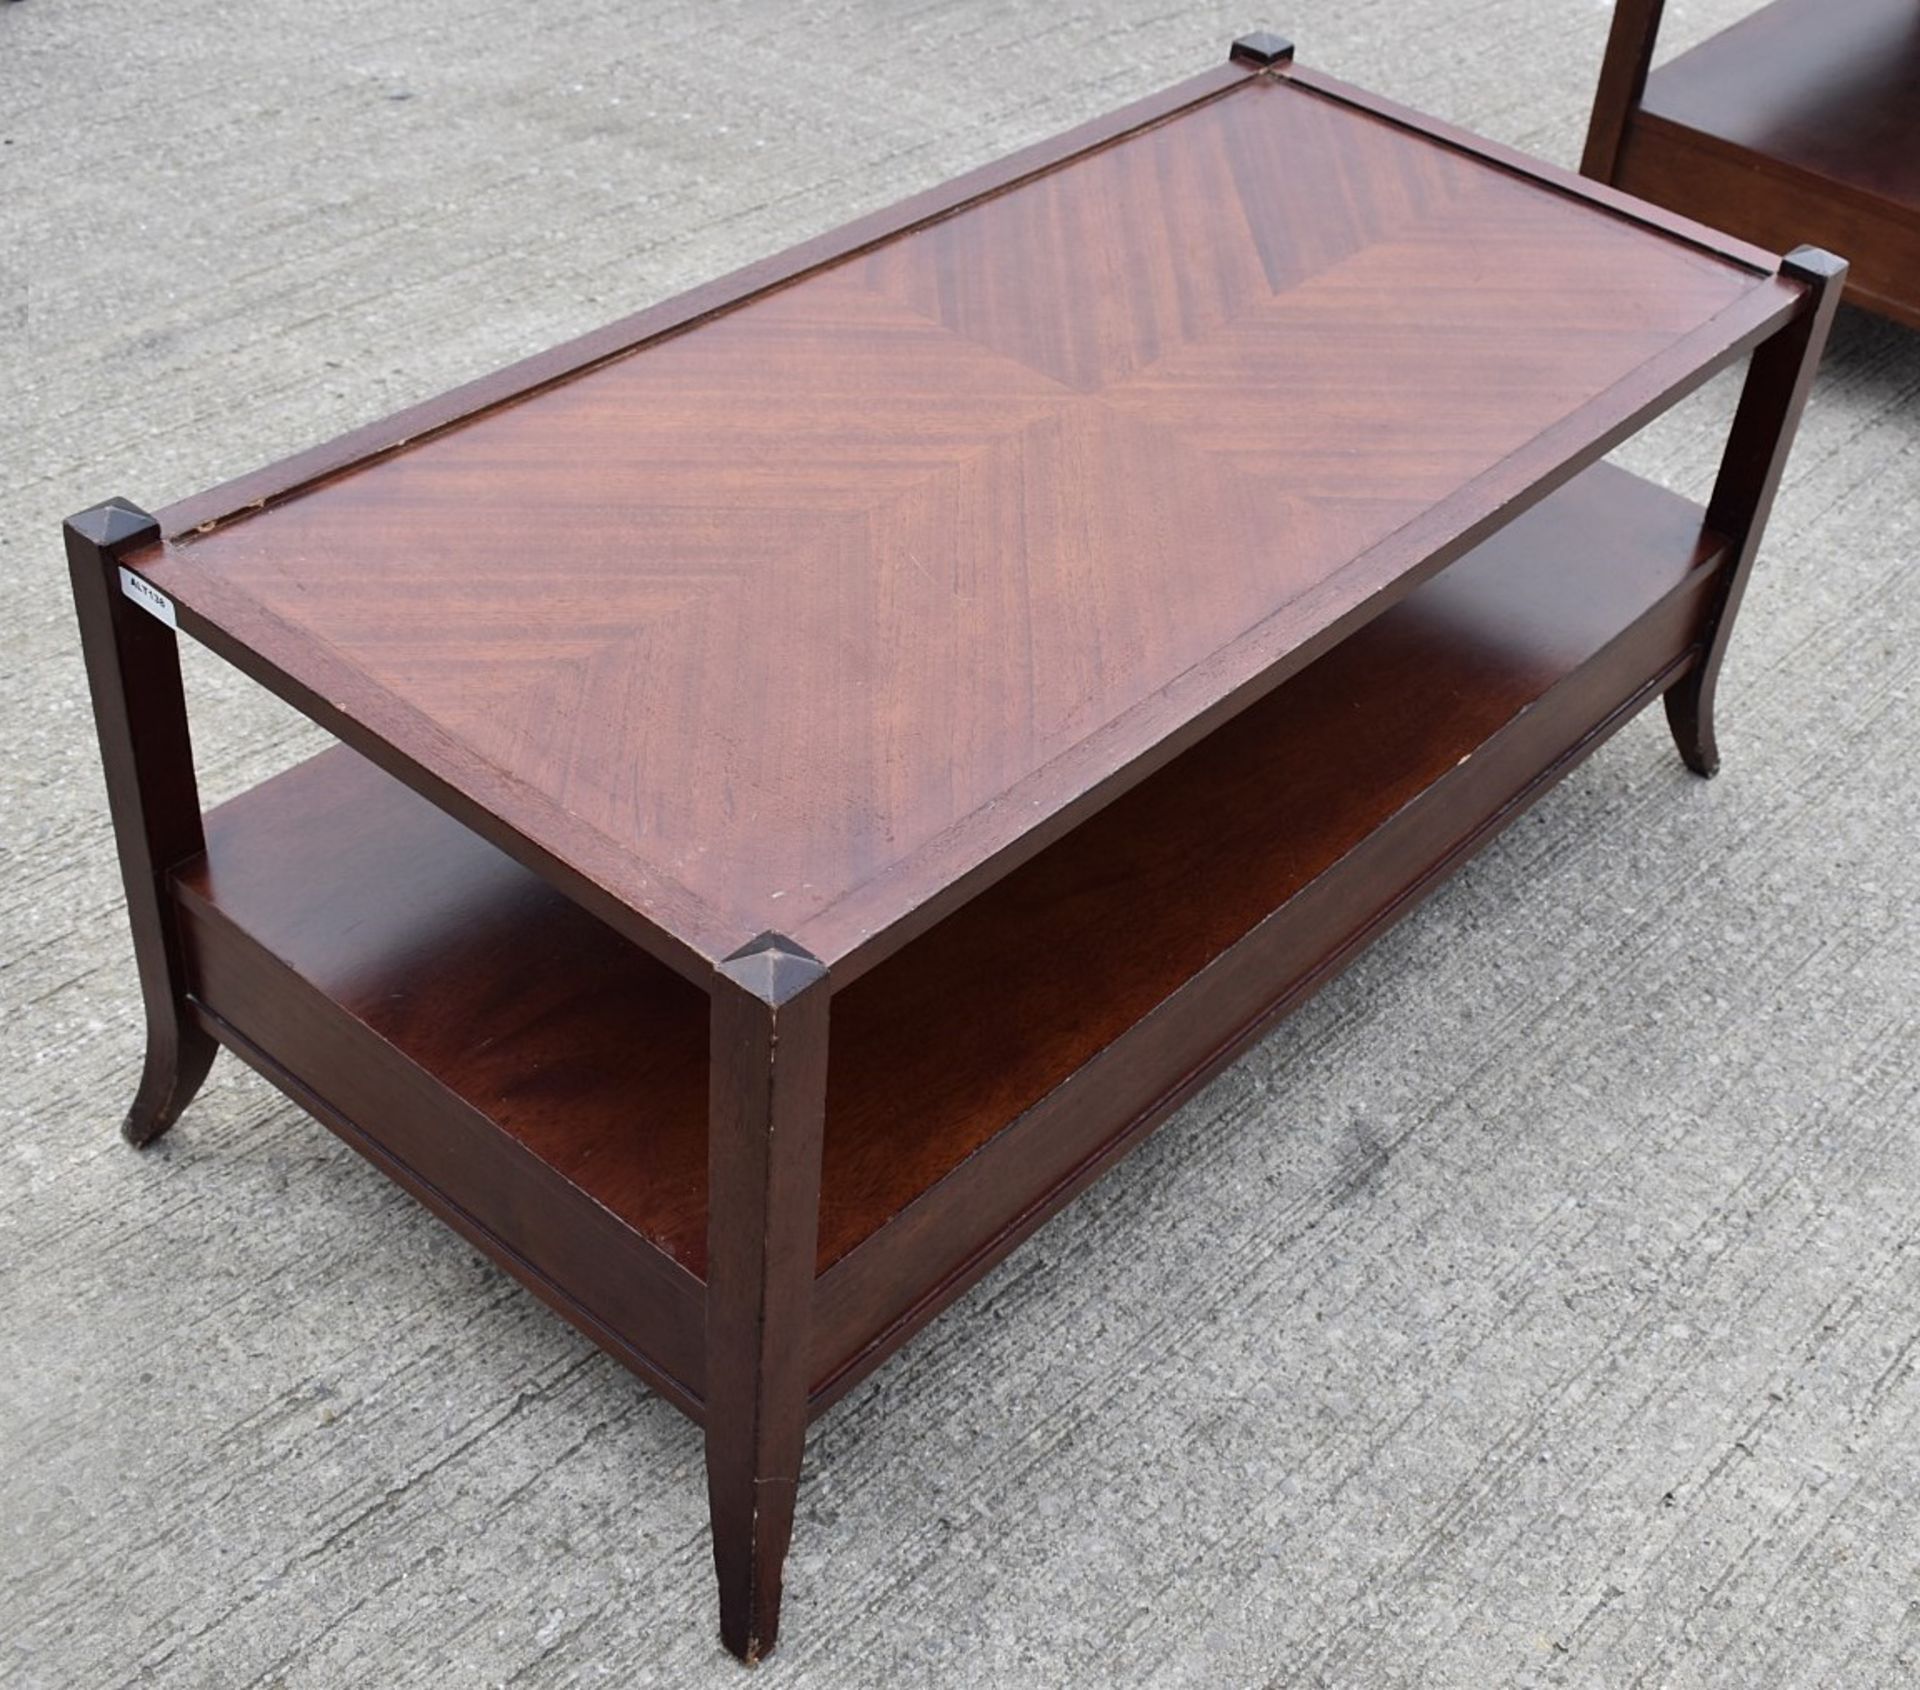 1 x Elegant Handcrafted Solid Wood Coffee / Cocktail Table with False Drawer Frontage - Recently - Image 3 of 3